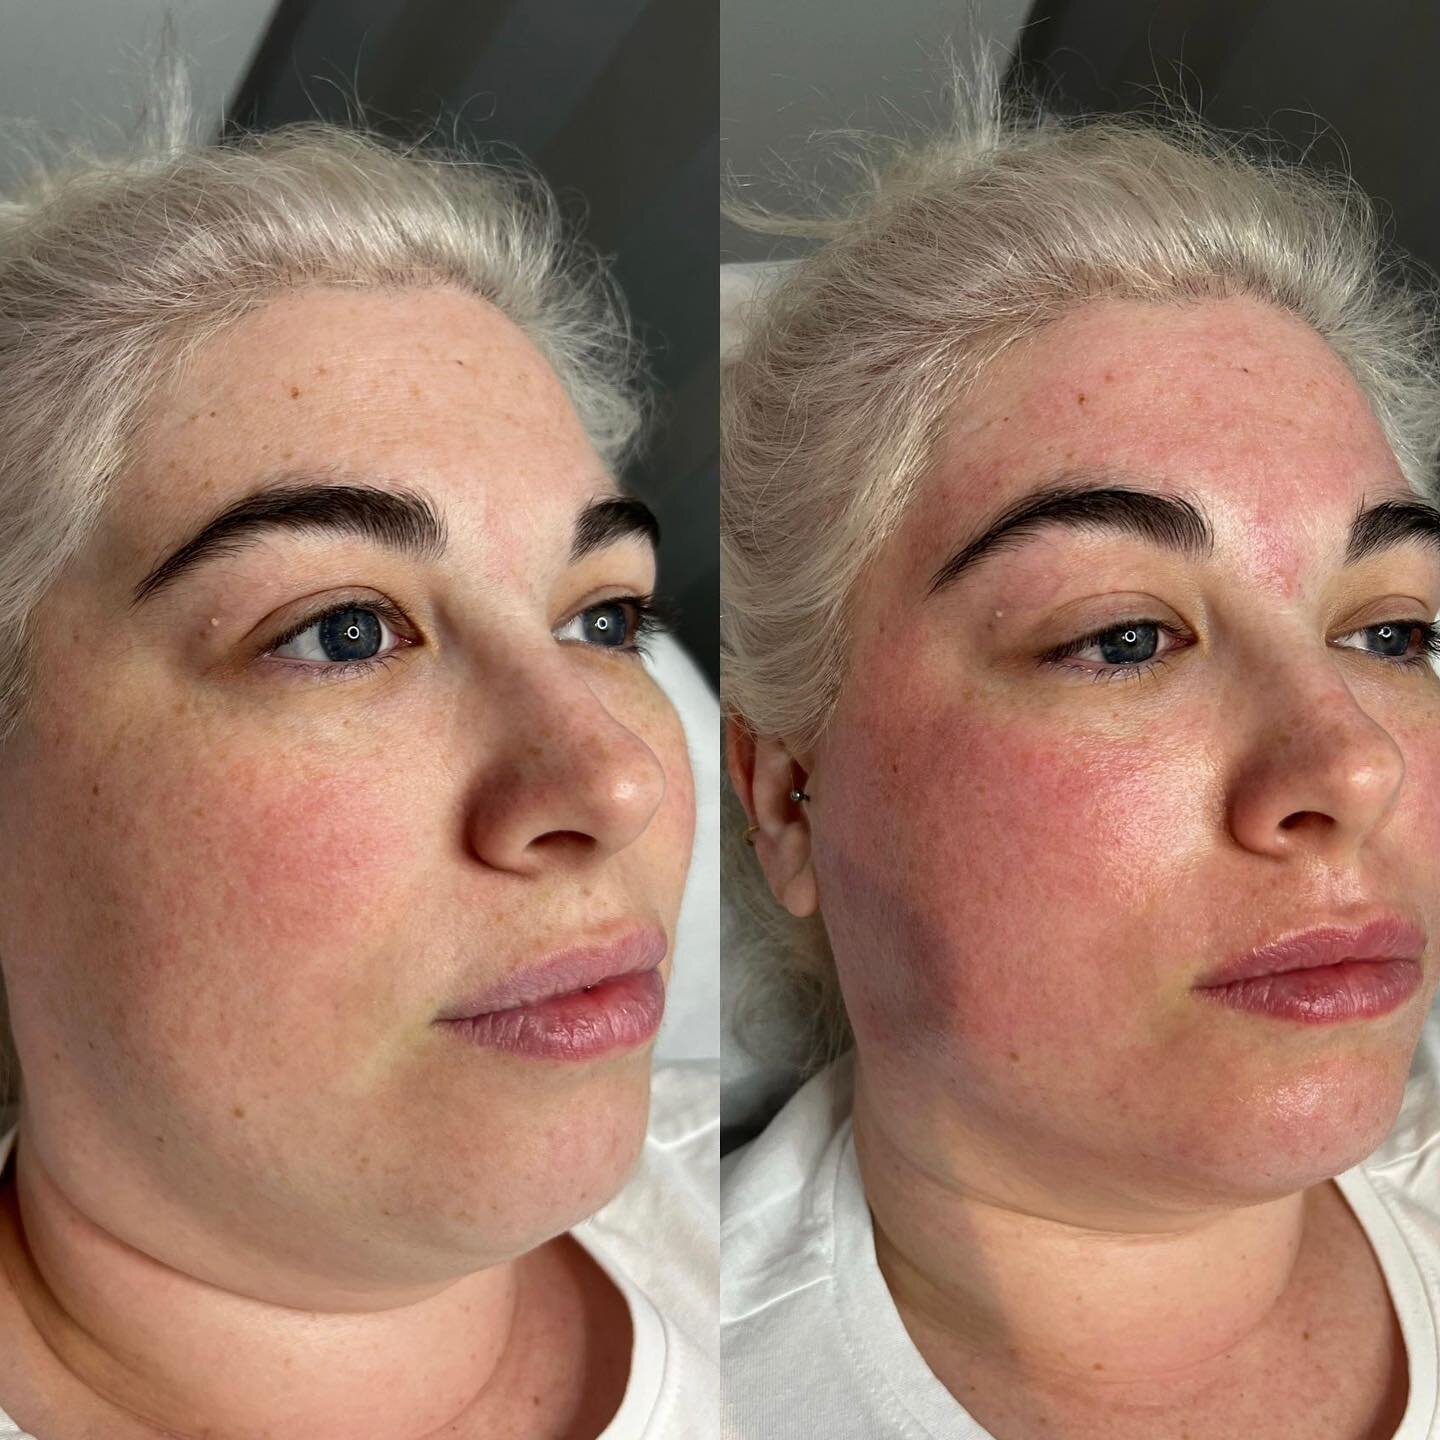 Immediate results from Fractional Skin Resurfacing ✨ 𝗕𝗘𝗡𝗘𝗙𝗜𝗧𝗦 ⬇️

&bull; Resurfaces skin texture 
&bull; Anti ages 
&bull; Tightens &amp; plumps skin 
&bull; Reduces acne scarring &amp; blemishes on the skin 
&bull; Lifts 
&bull; Reduces jowl